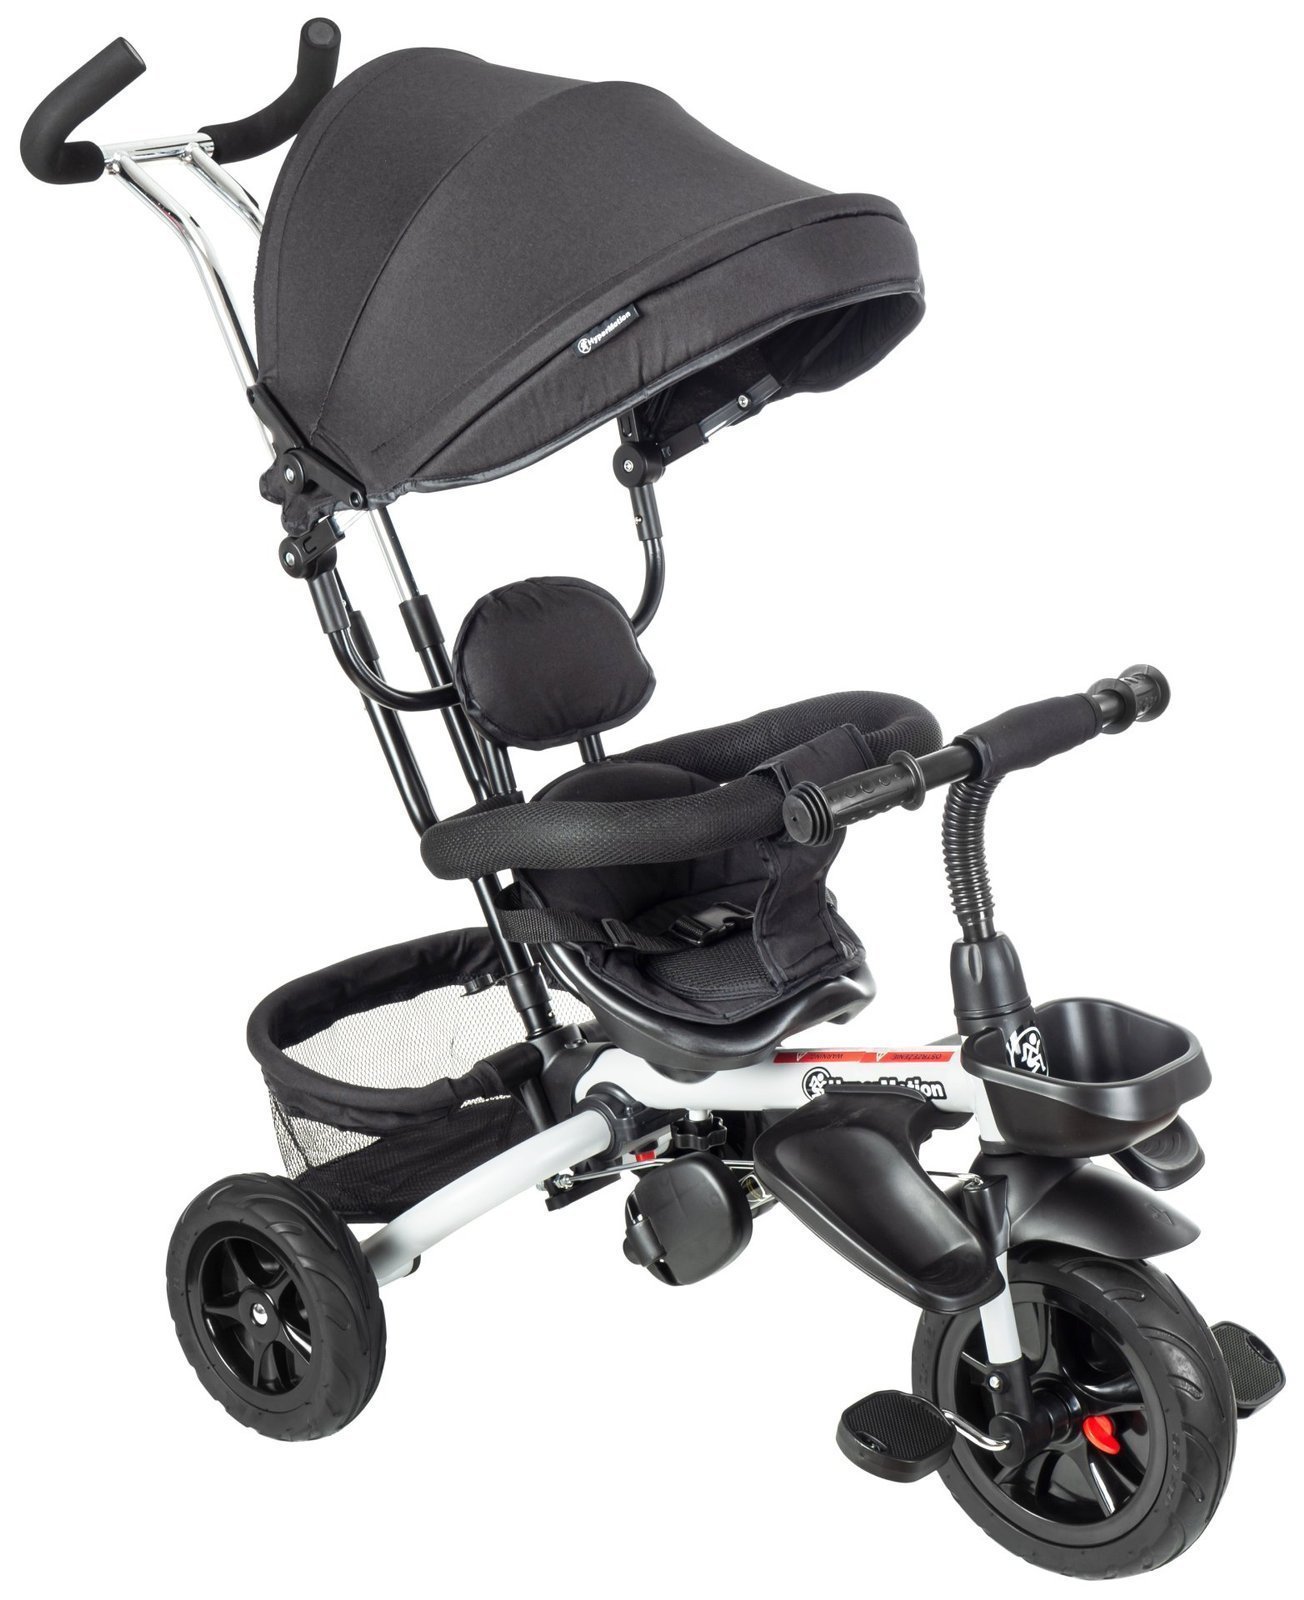 HyperMotion TOBI BUZZ tricycle – rotatable, foldable. Color: gray and black.